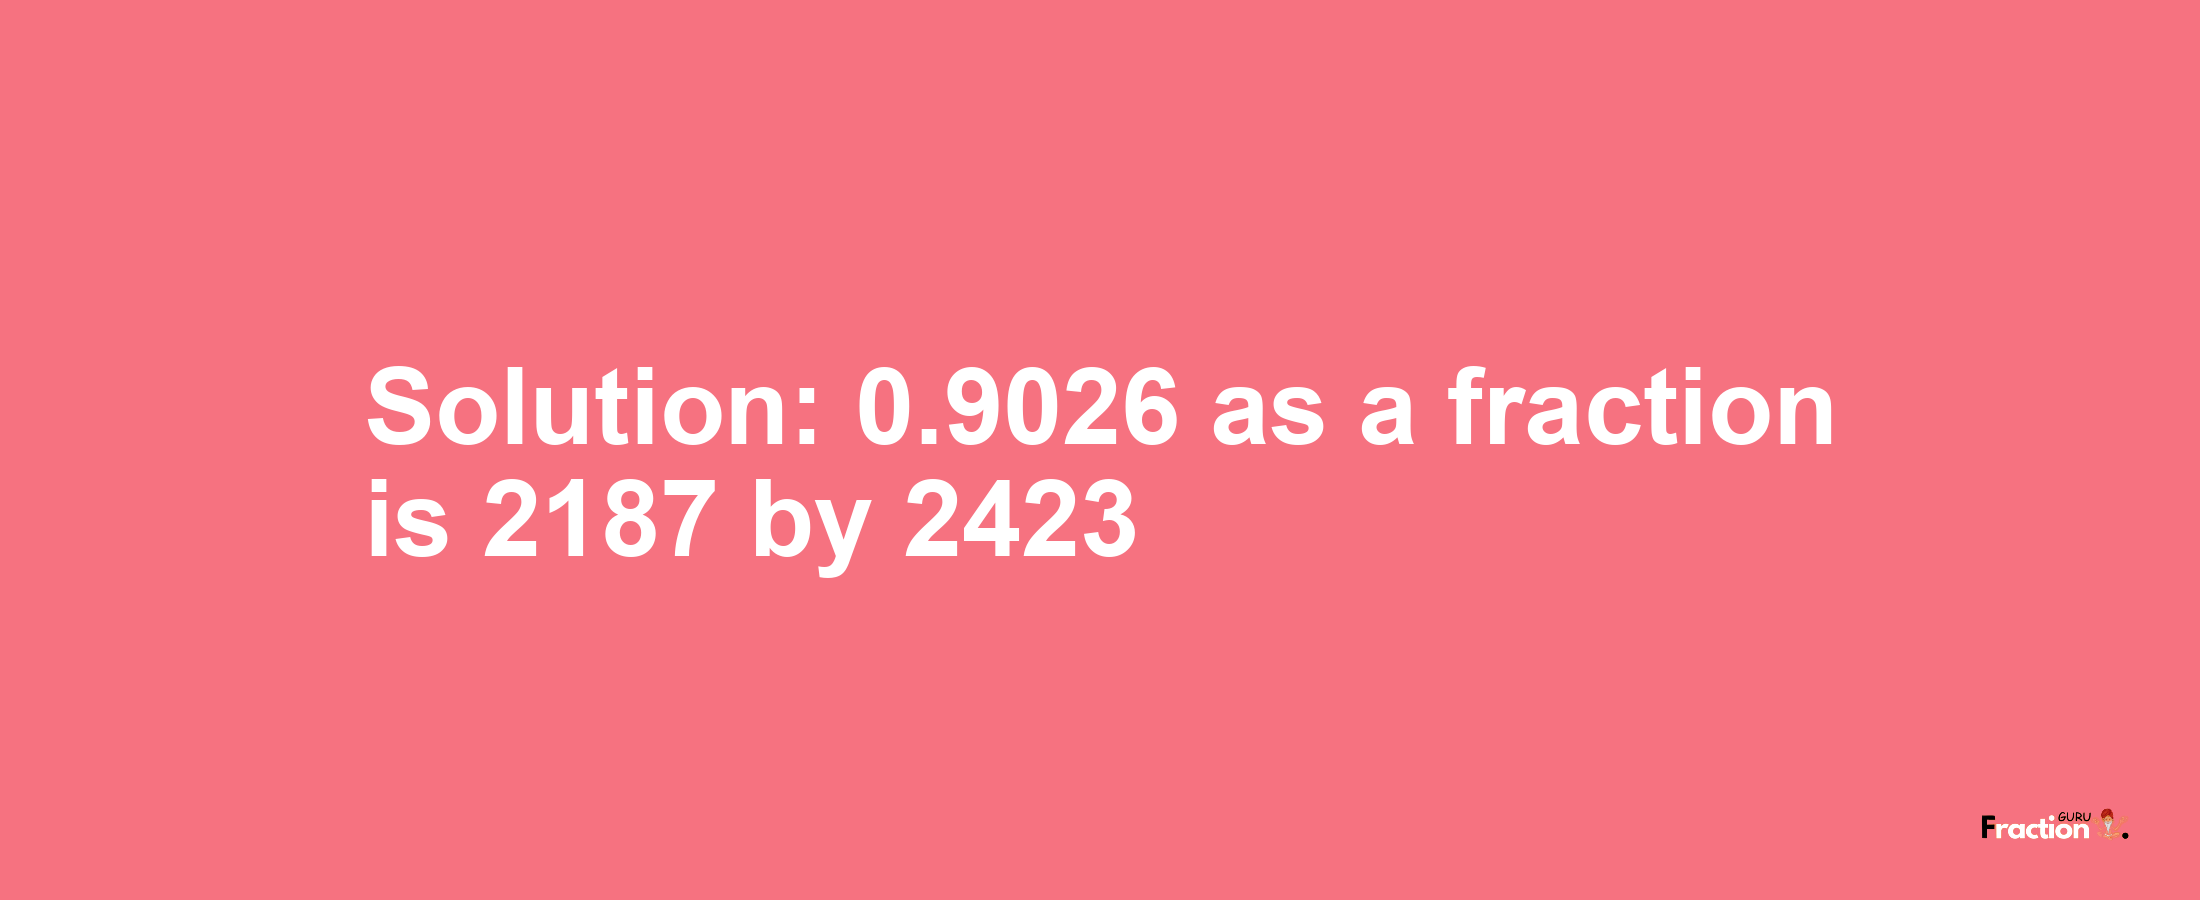 Solution:0.9026 as a fraction is 2187/2423